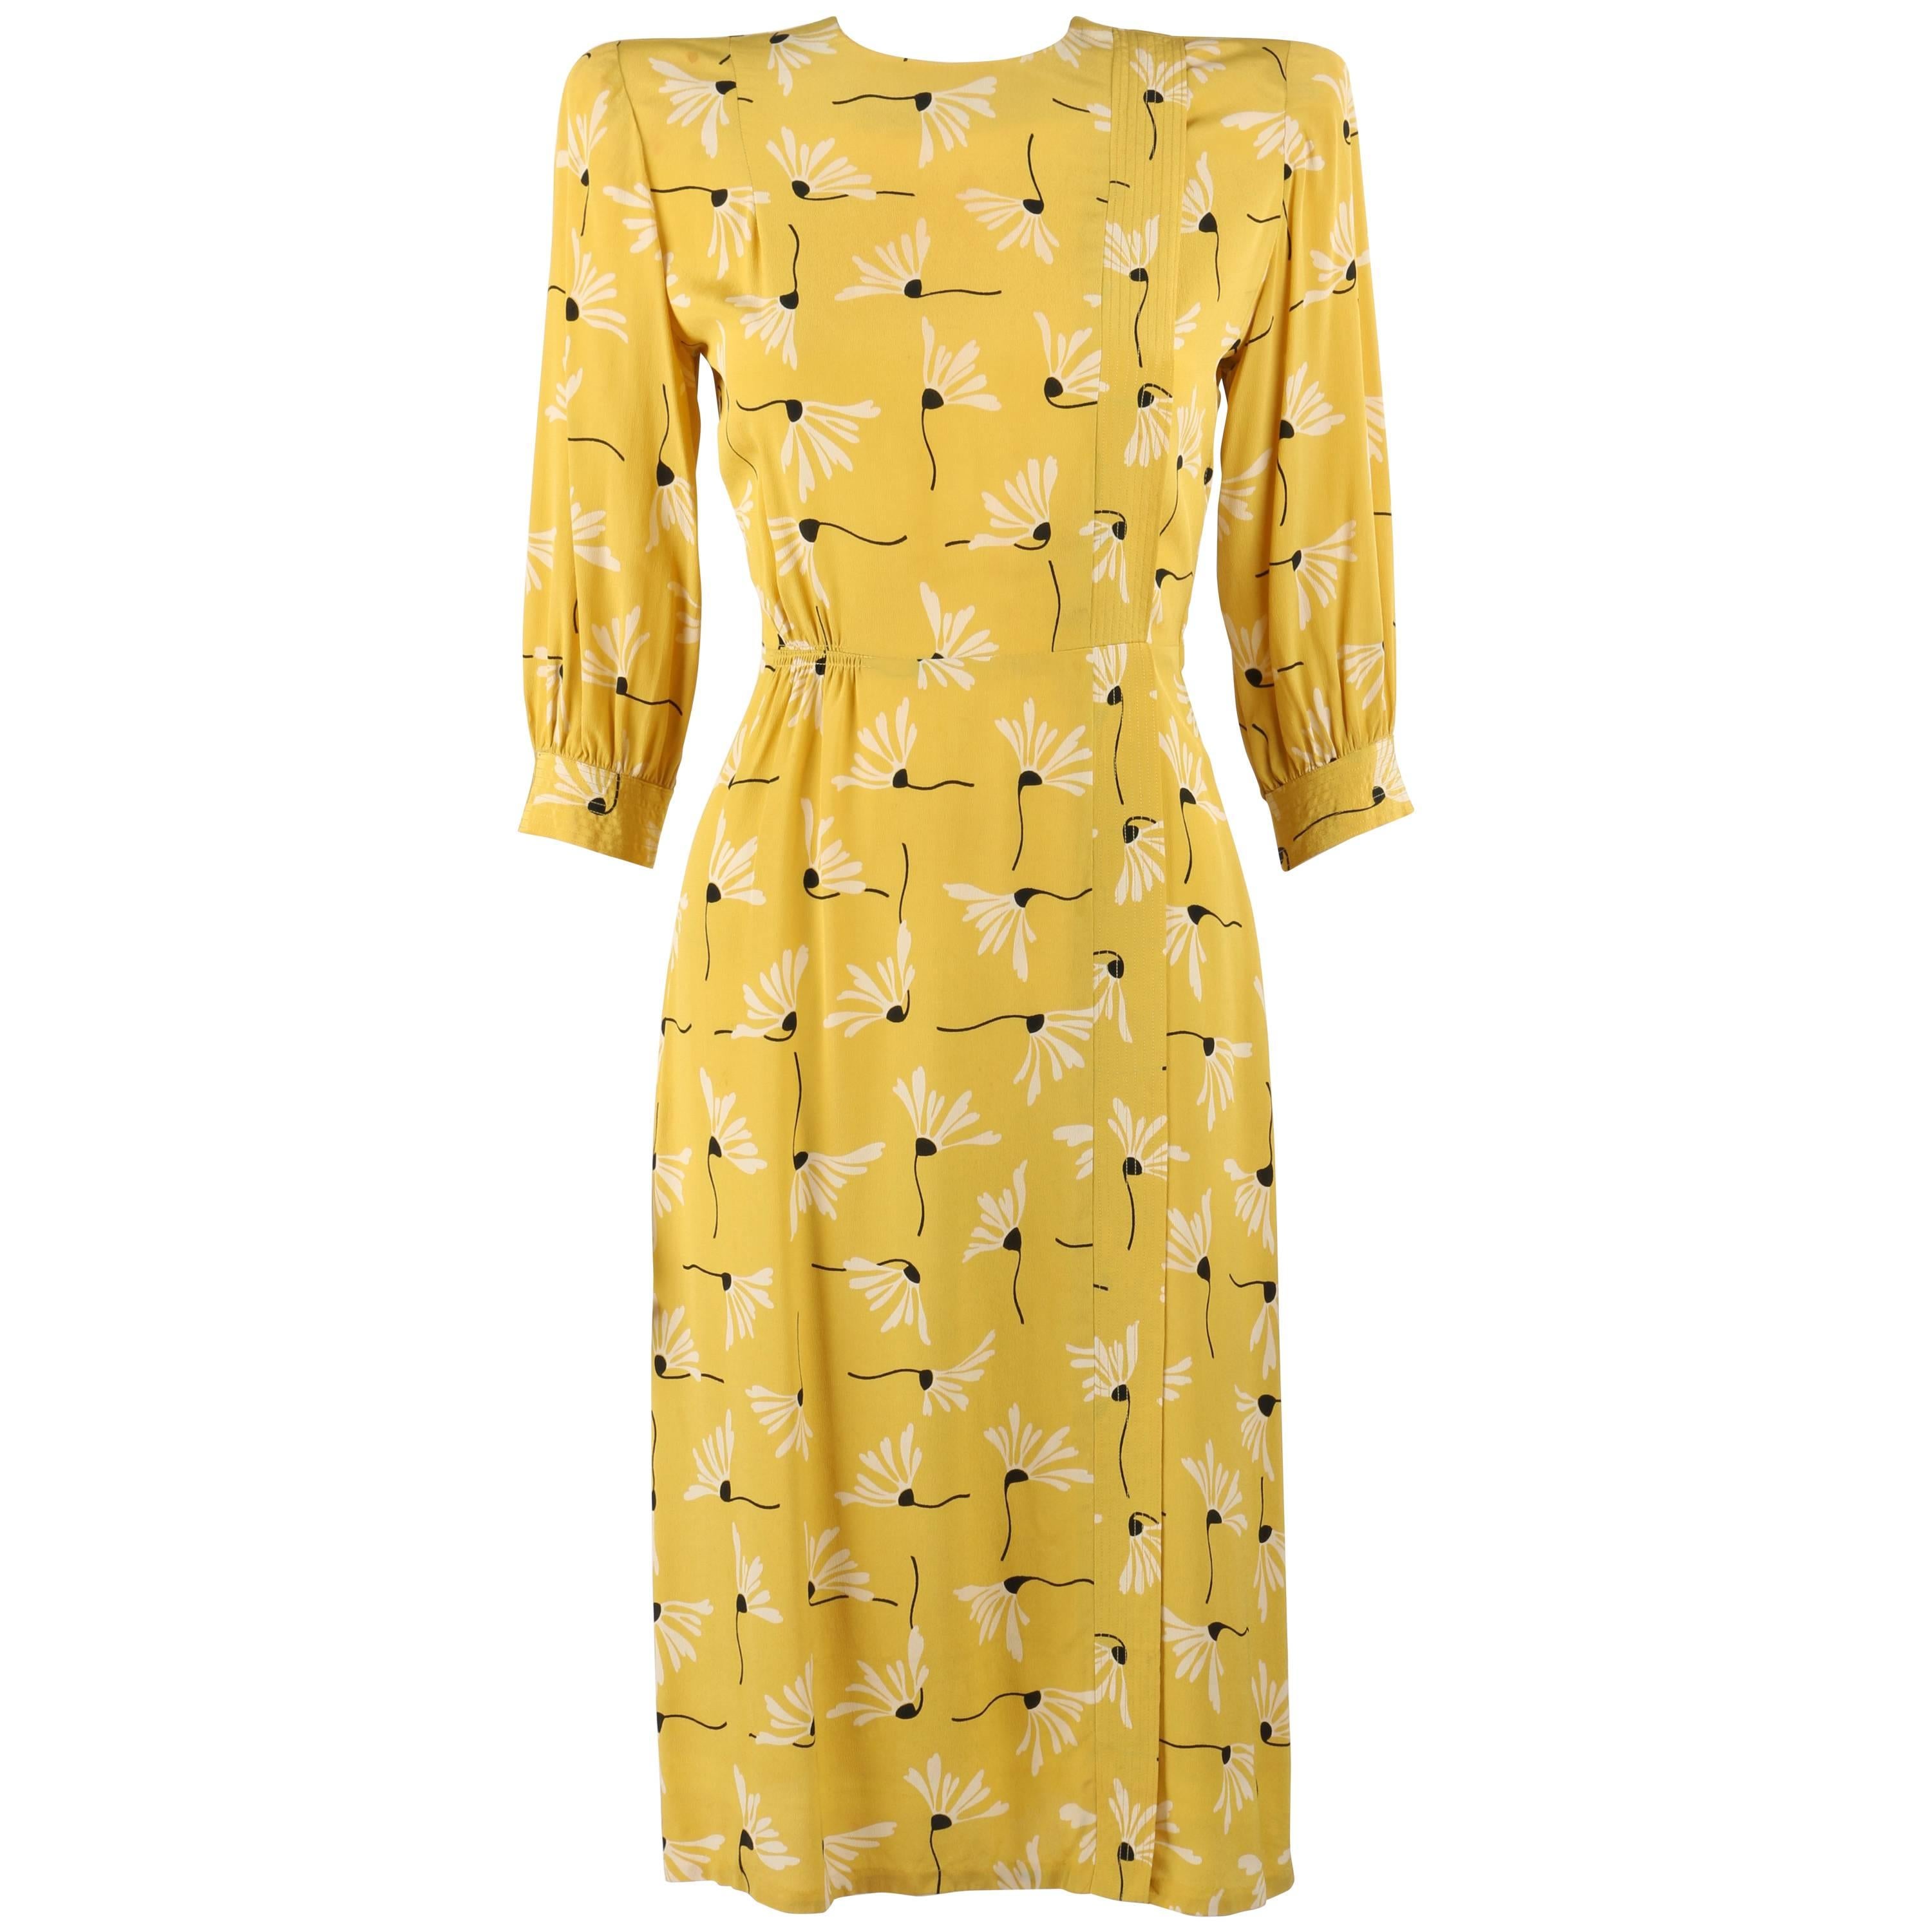 SERGEE OF CALIFORNIA c.1940's Yellow Daisy Floral Print Rayon Crepe Day Dress